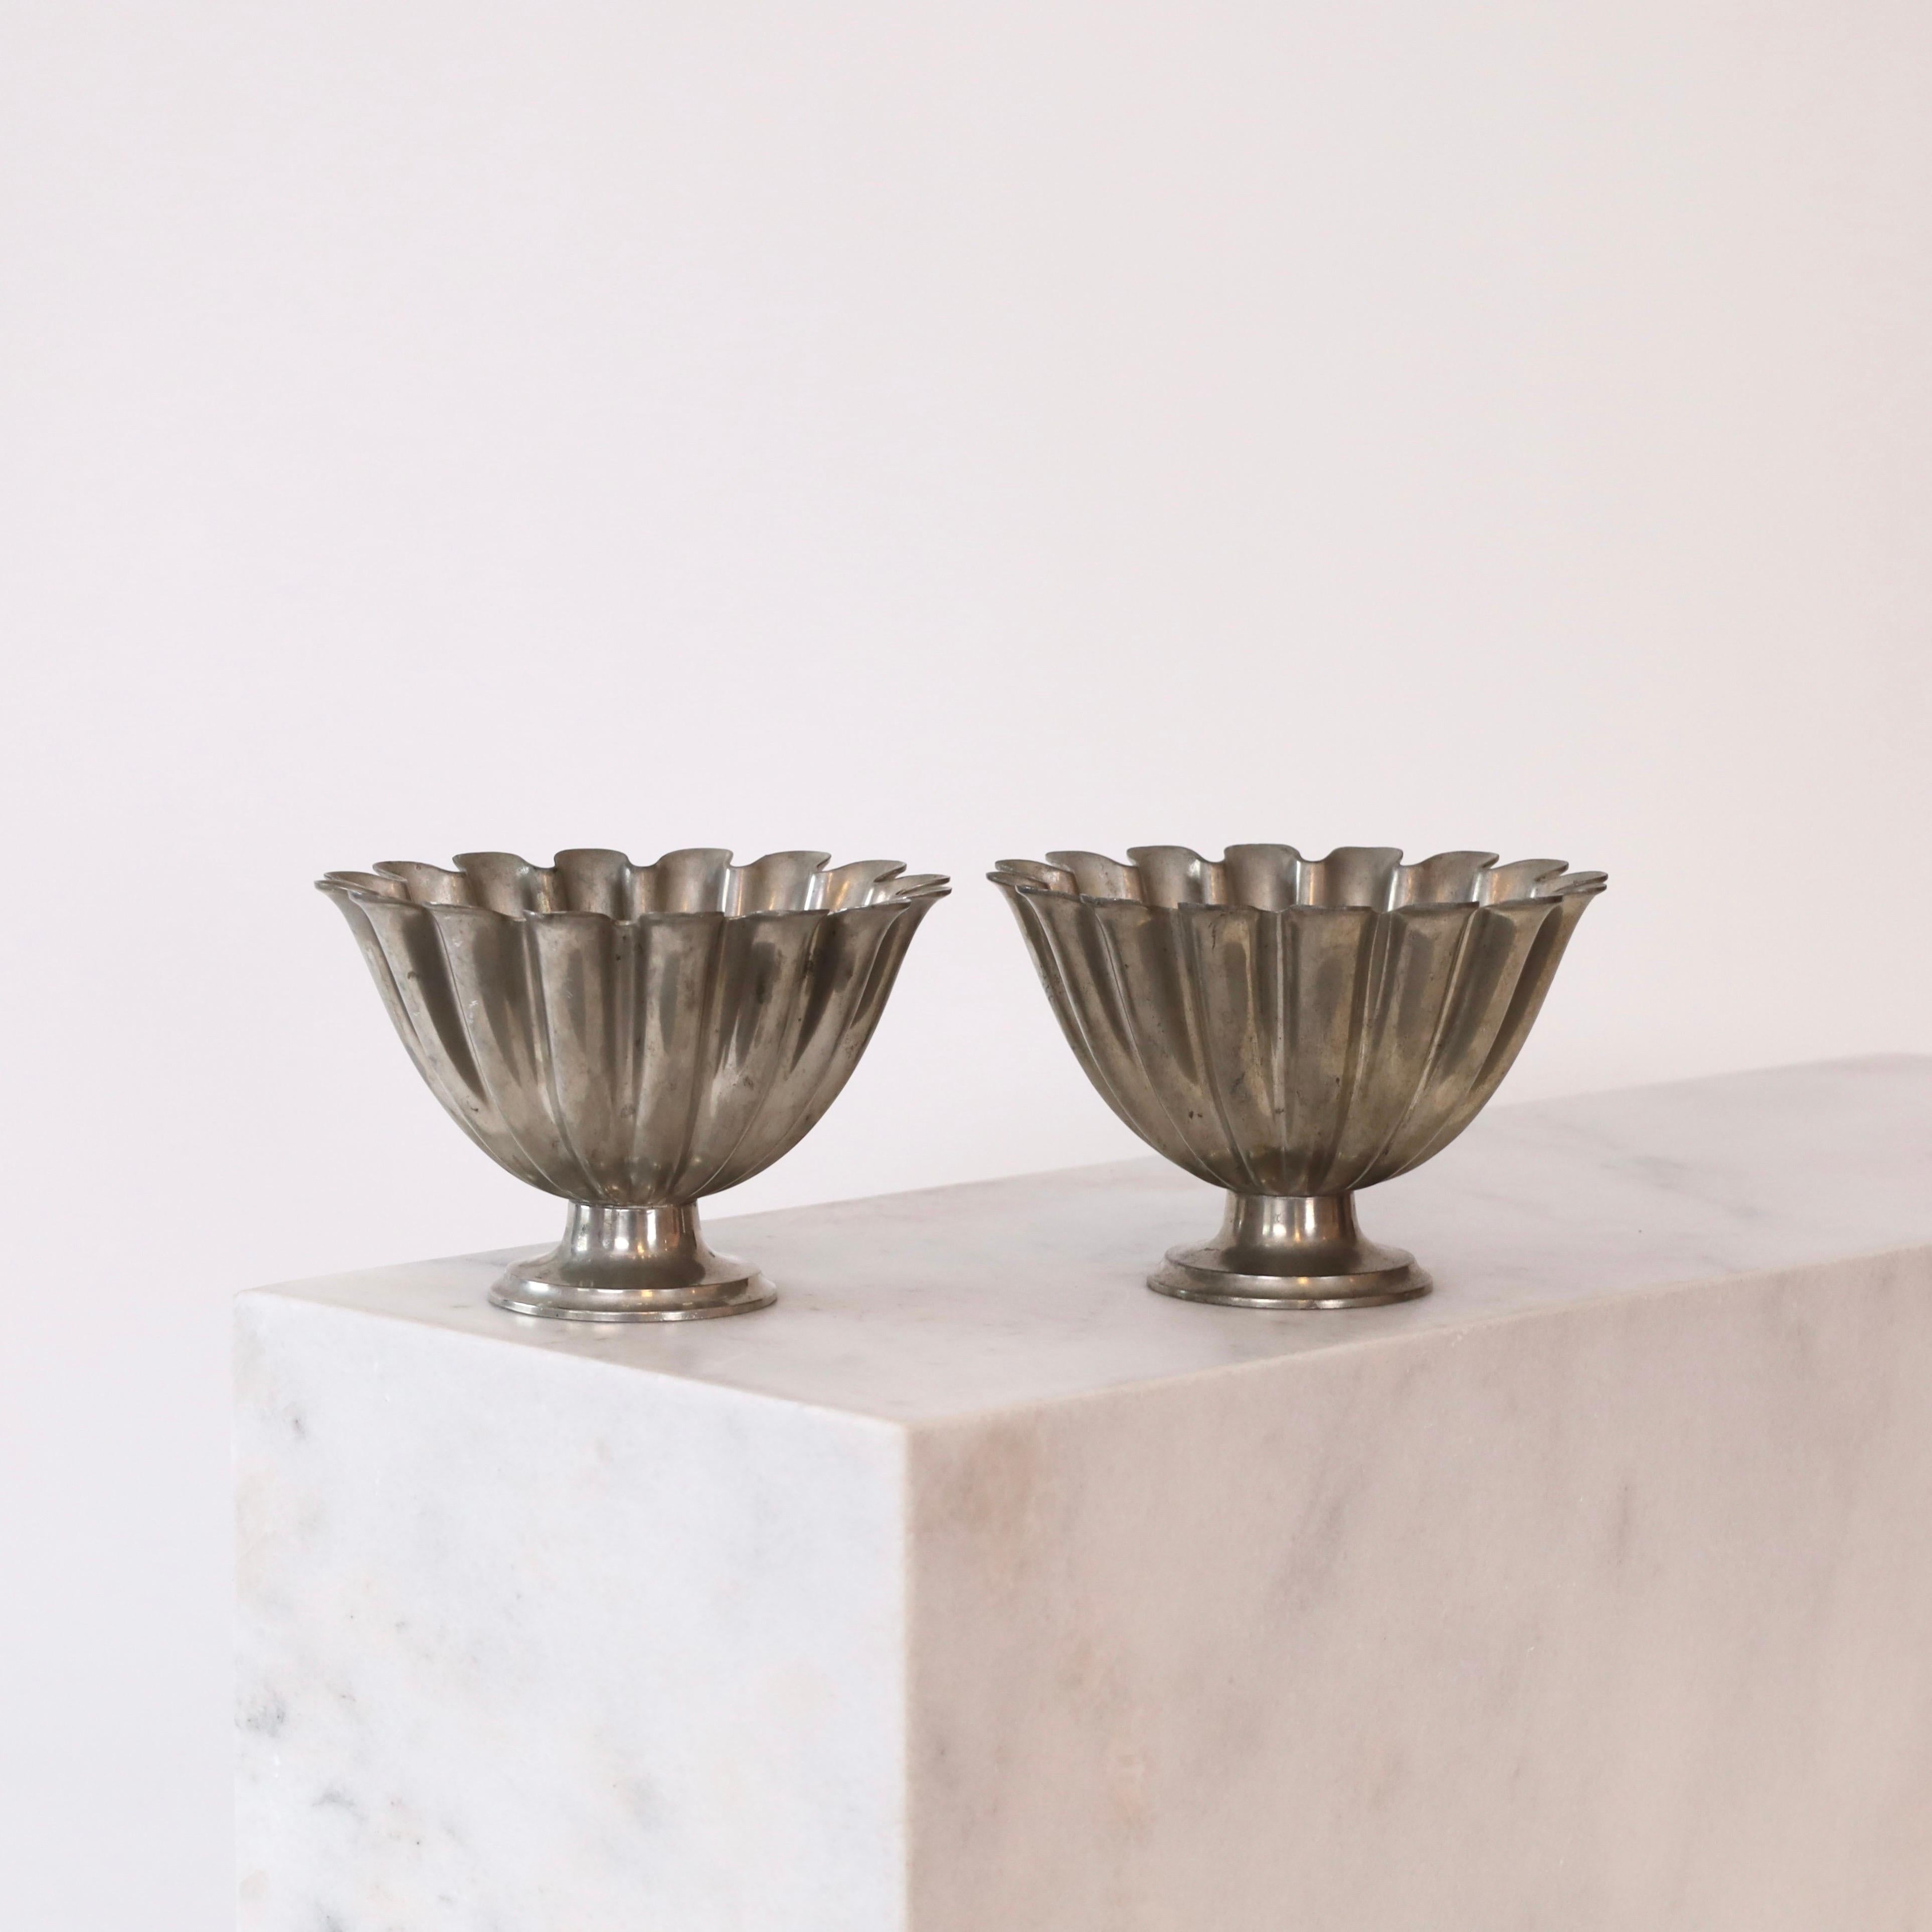 Pair of Scalloped pedestal pewter bowls by Just Andersen 1920s, Denmark For Sale 4